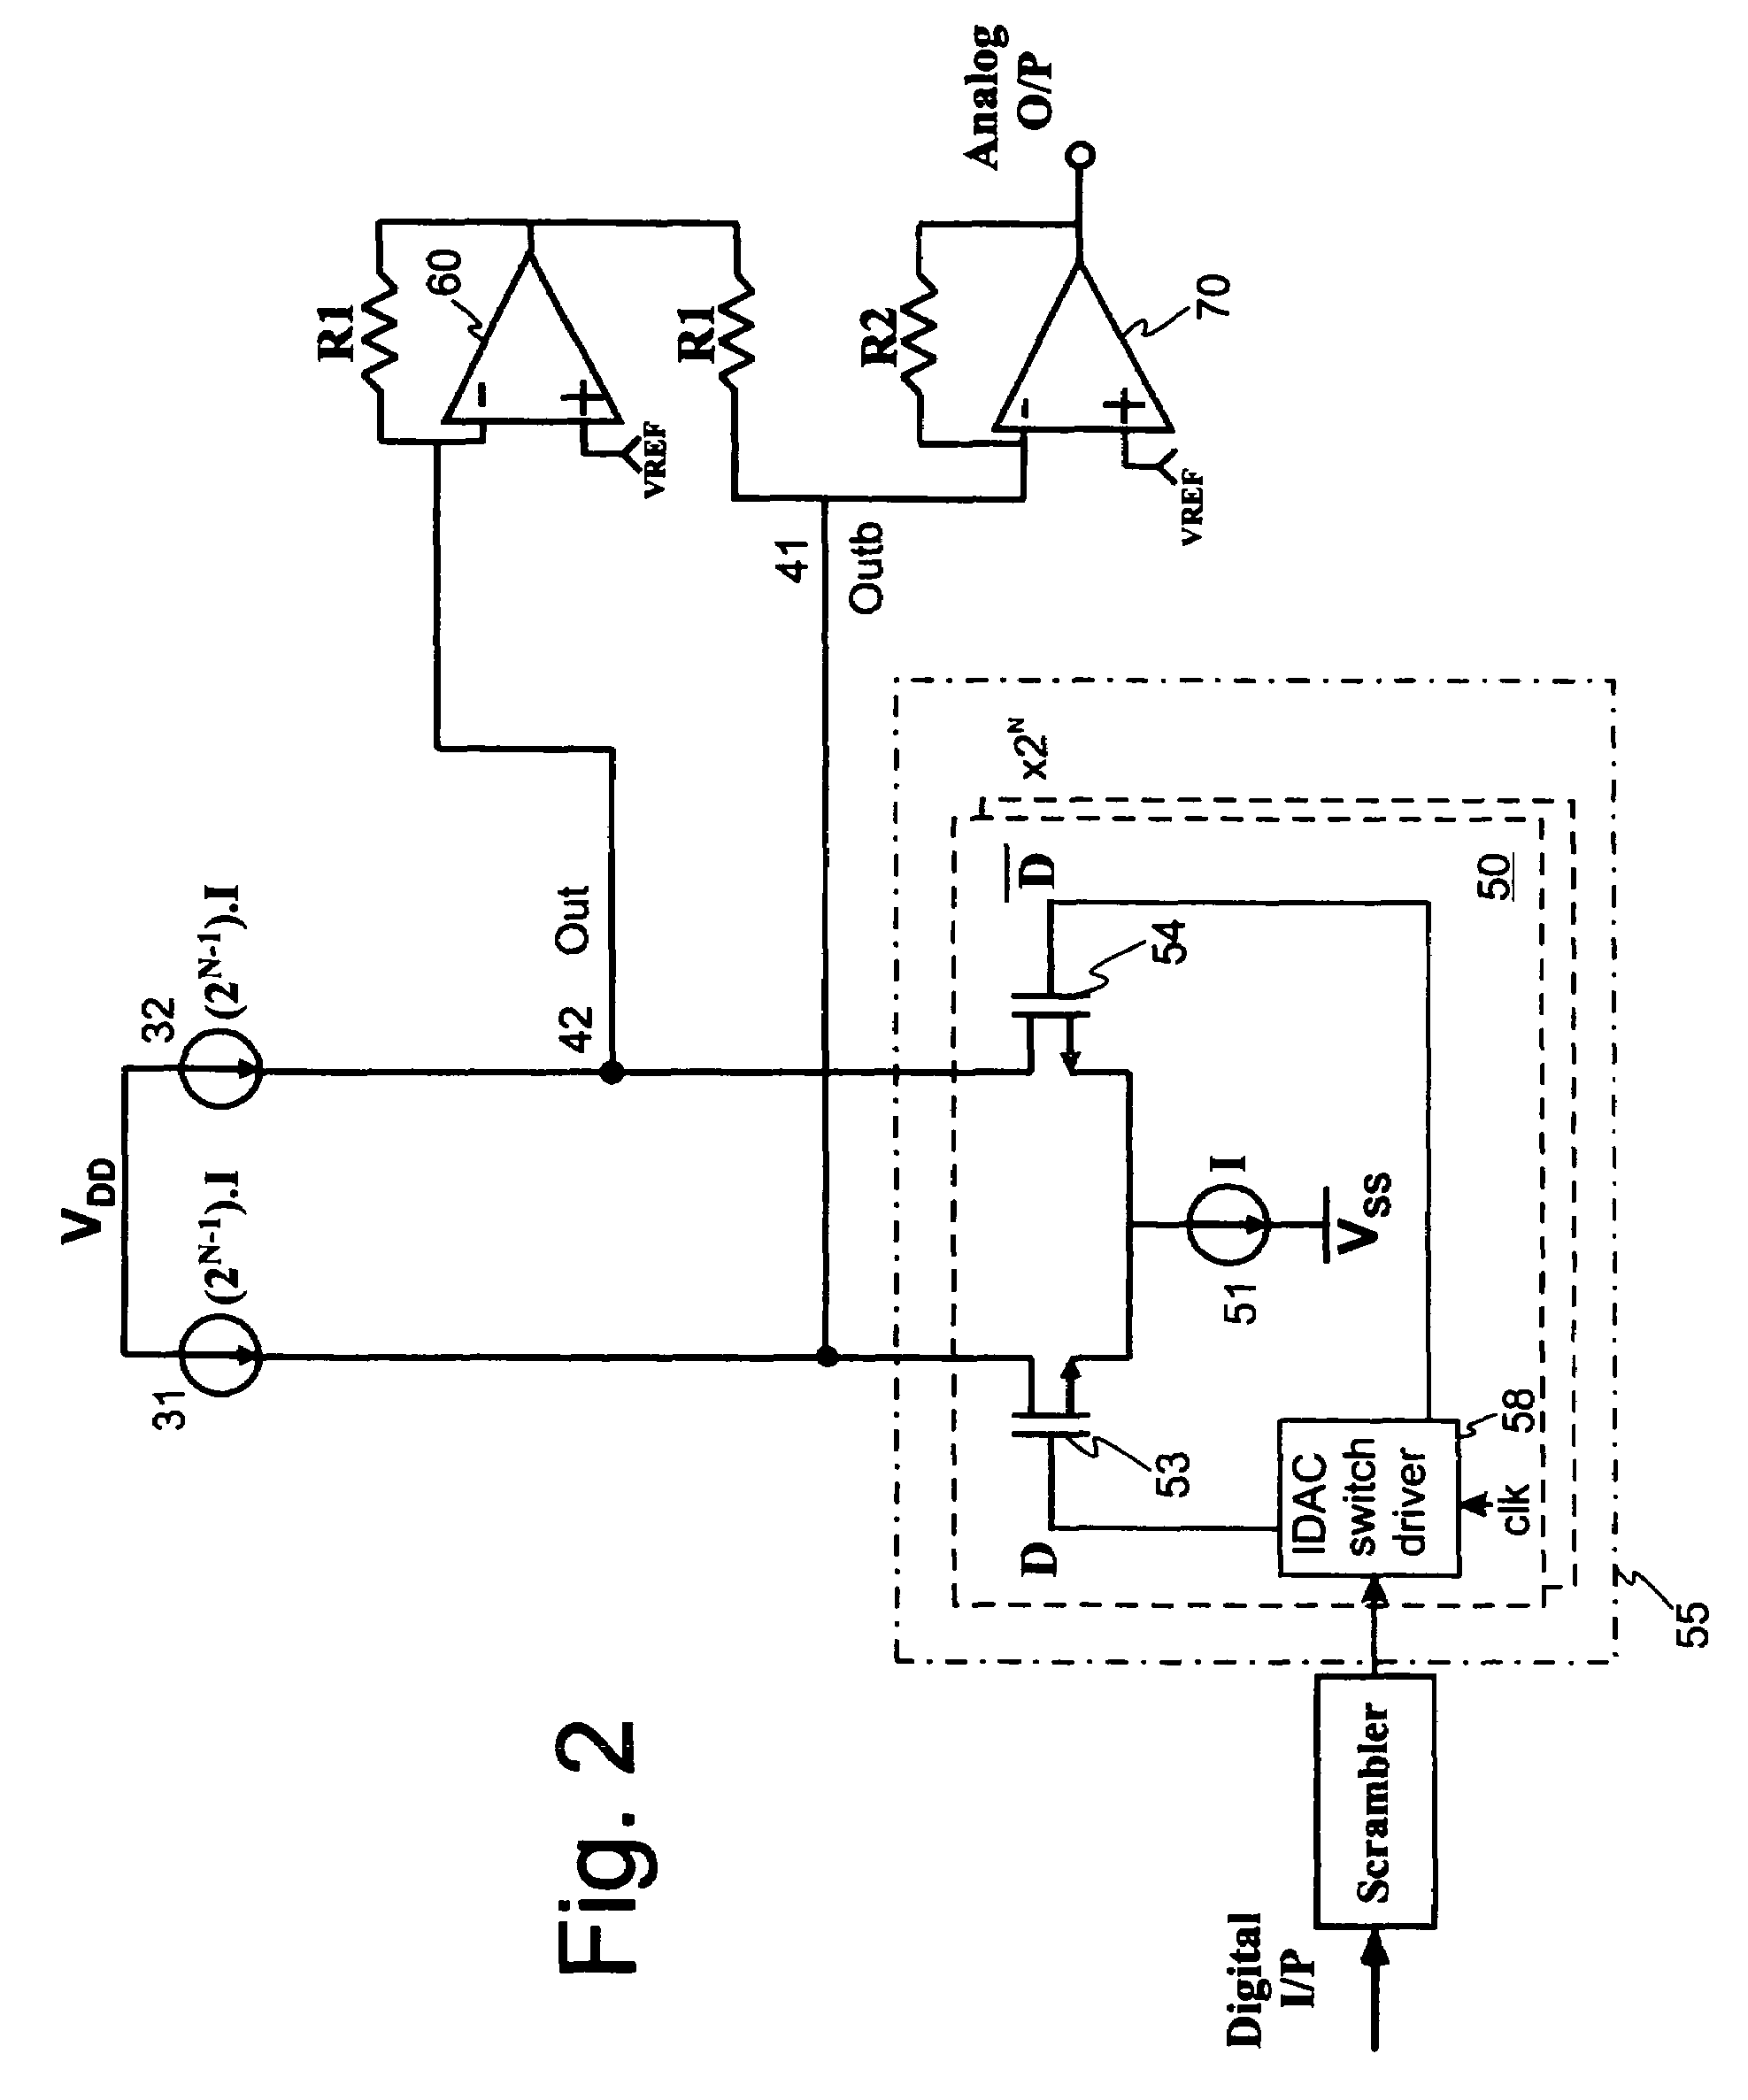 Continuous-time-sigma-delta DAC using chopper stabalization